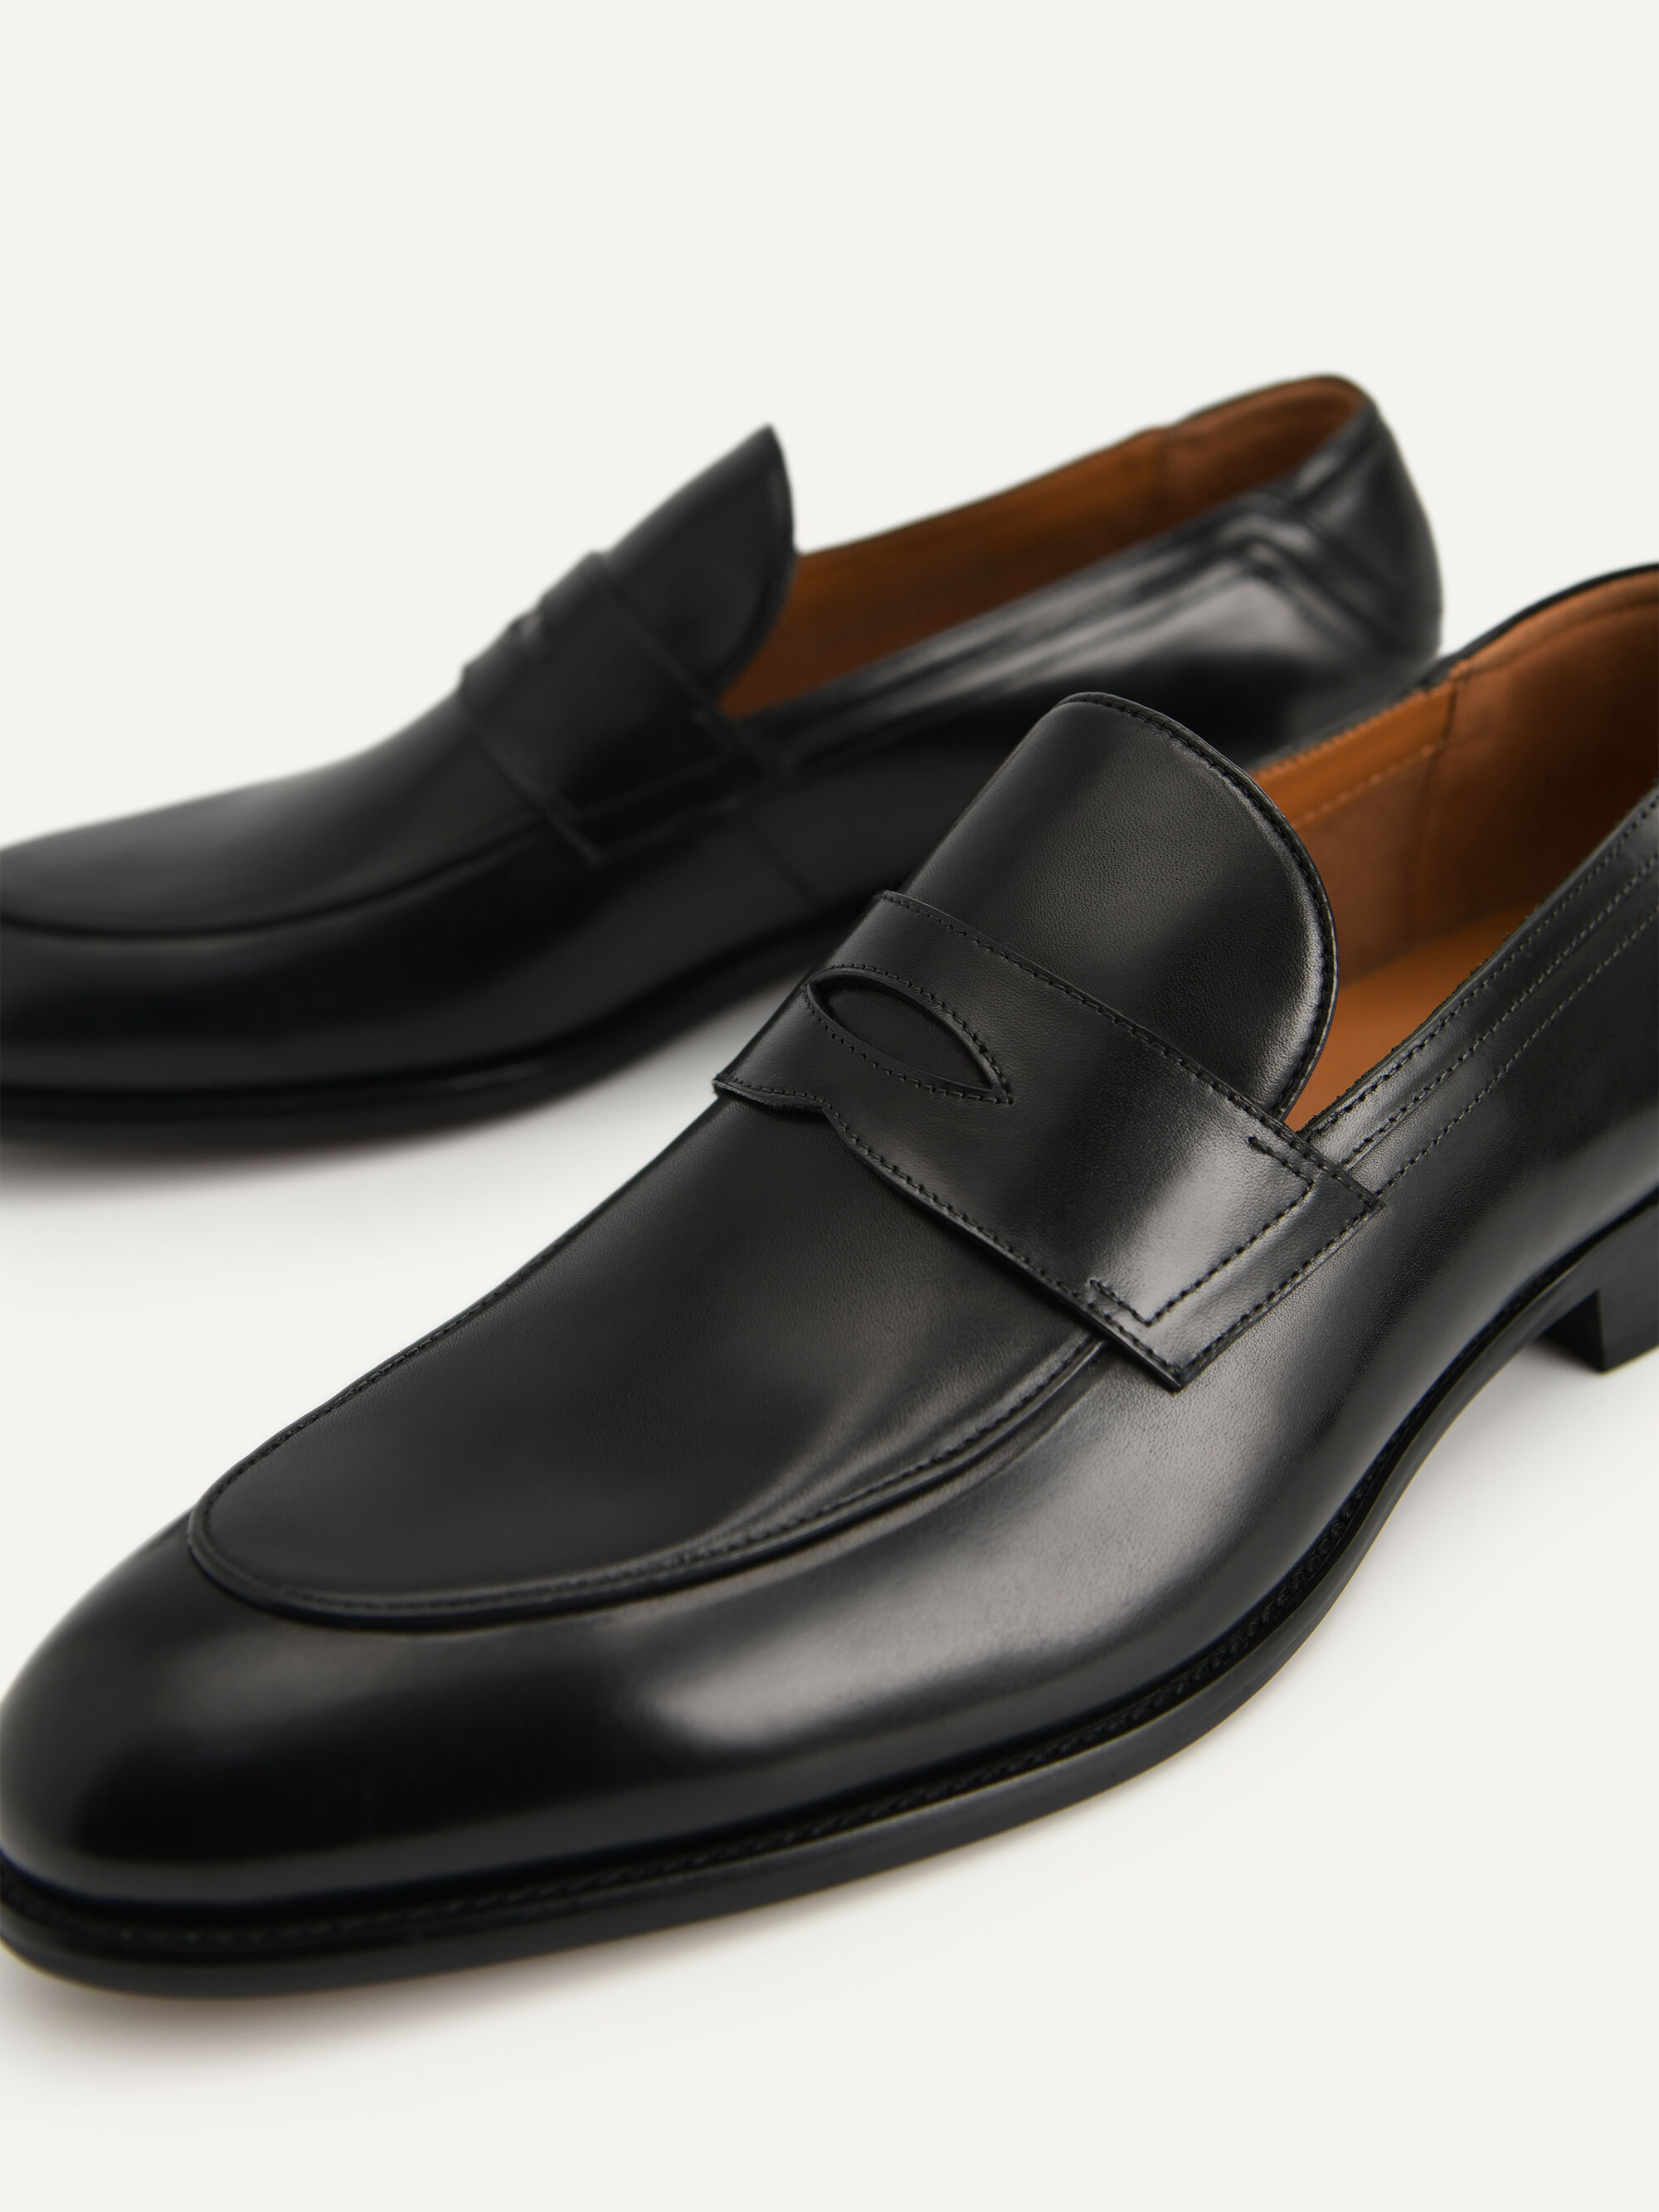 Leather Penny Loafers - PEDRO SG